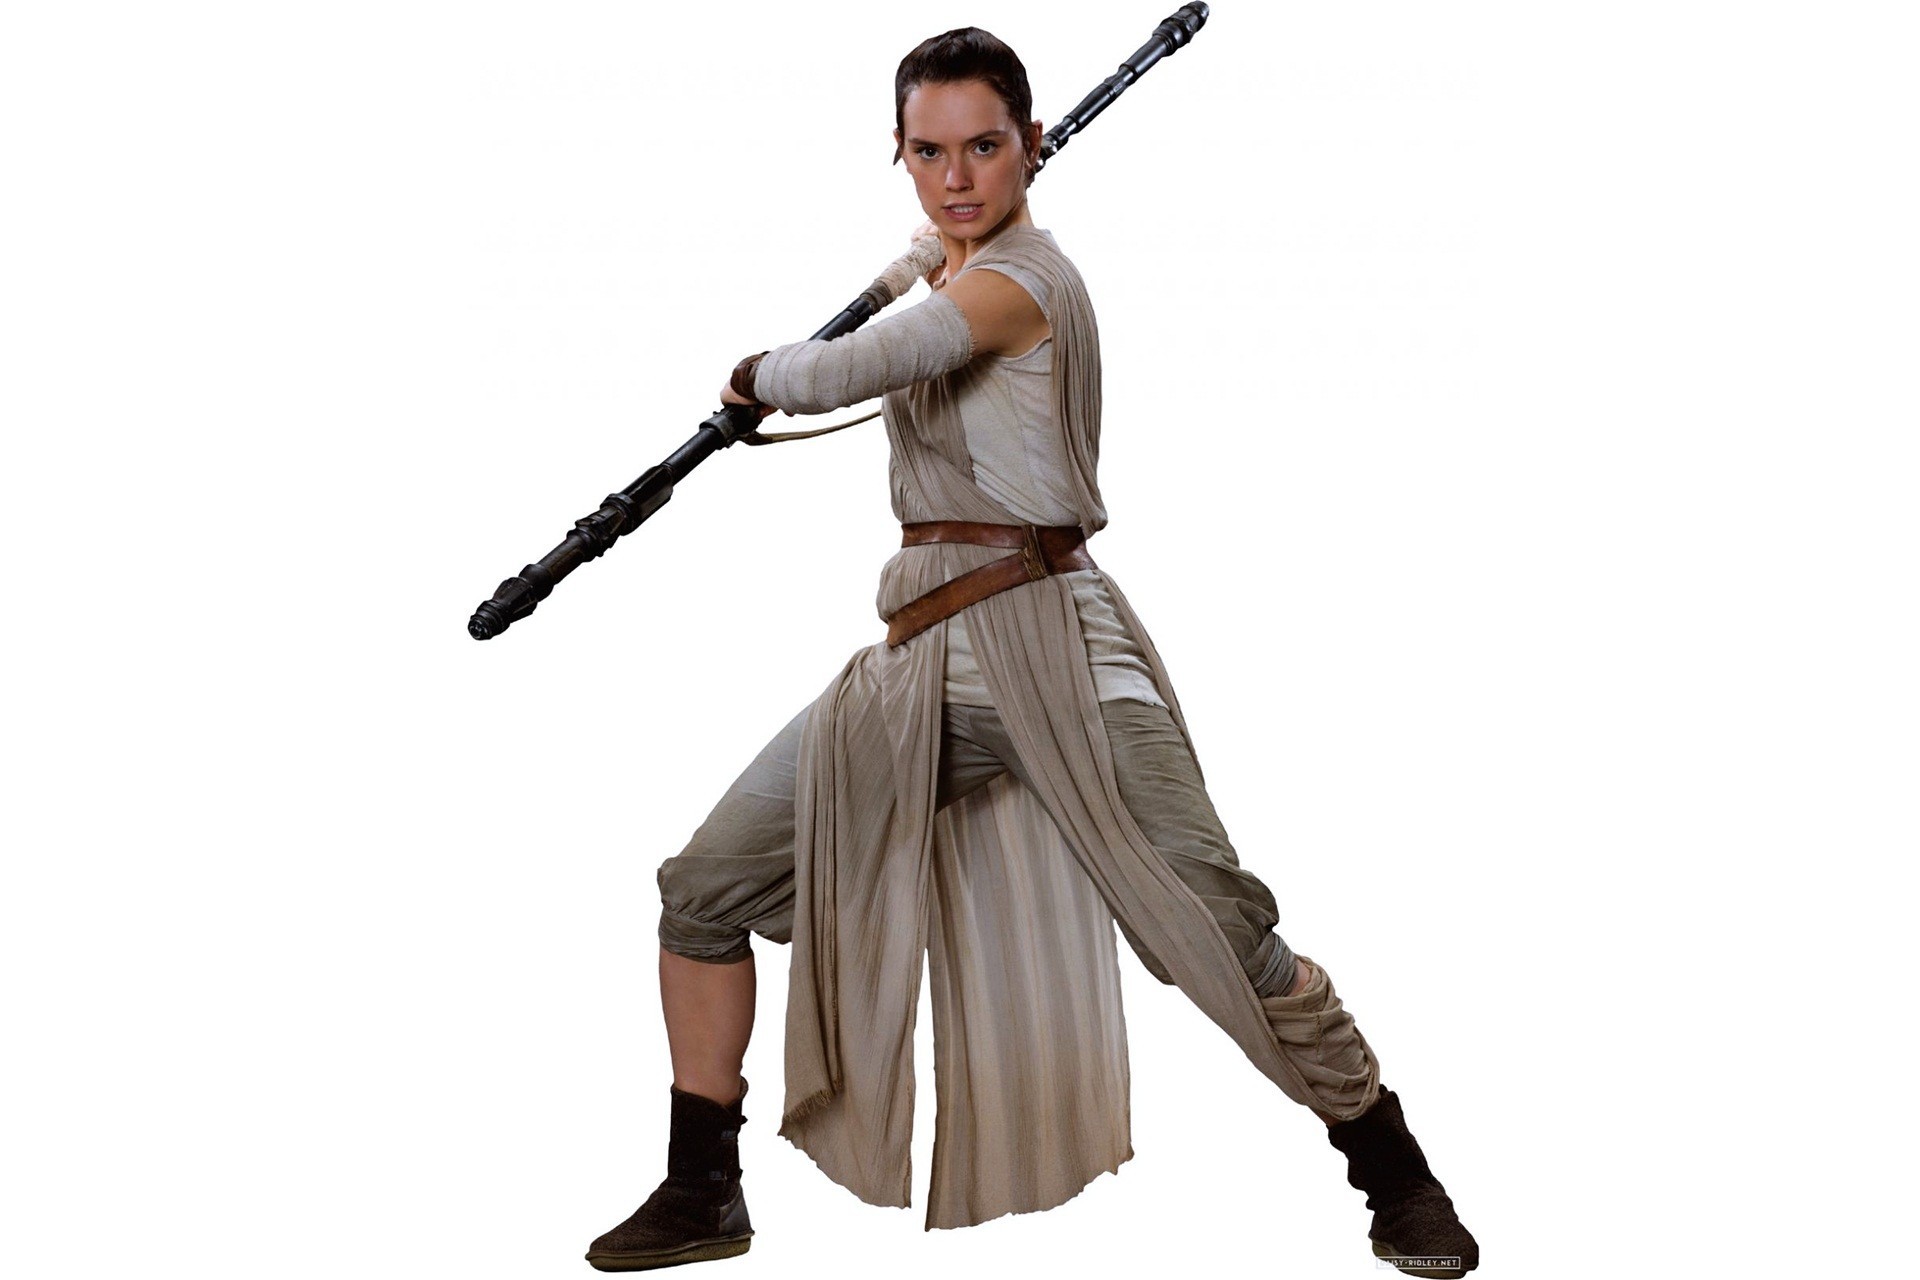 1920x1280 Daisy Ridley – Star Wars The Force Awakens Action Images #07310 | HD  Wallpapers Images